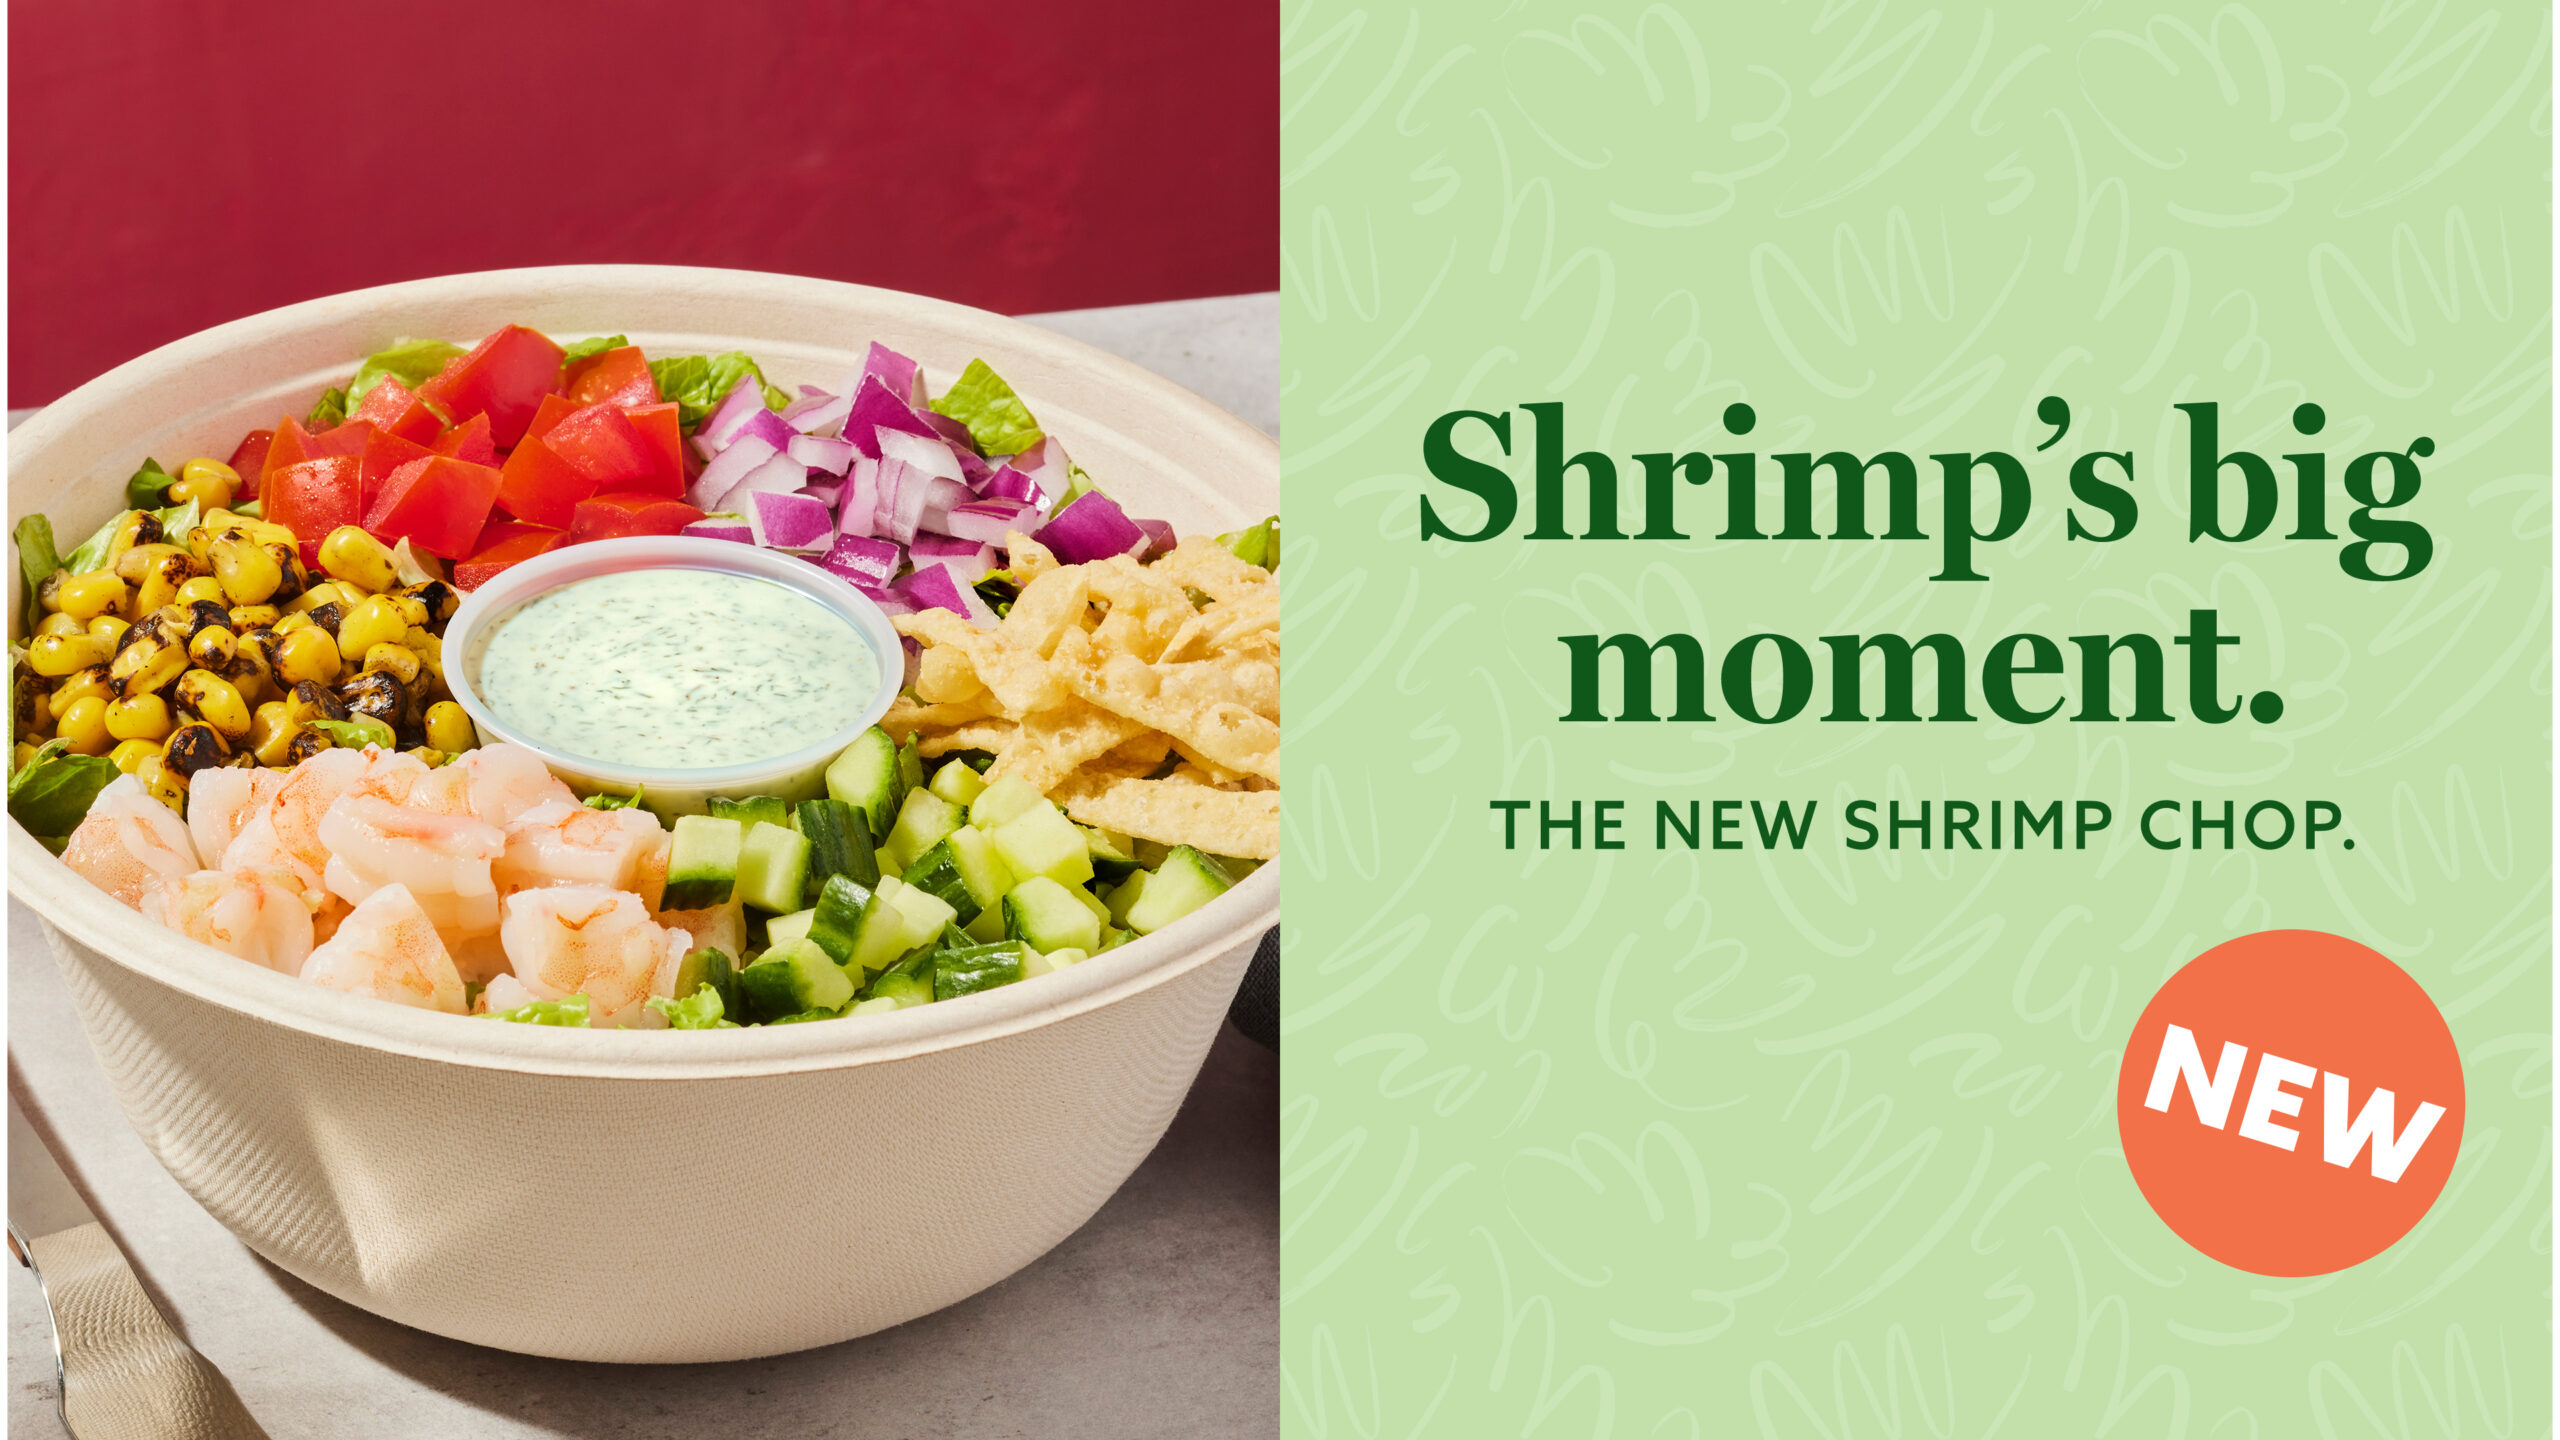 A bowl of shrimp salad with various fresh vegetables and a cup of creamy dressing in the center. The text below reads, 